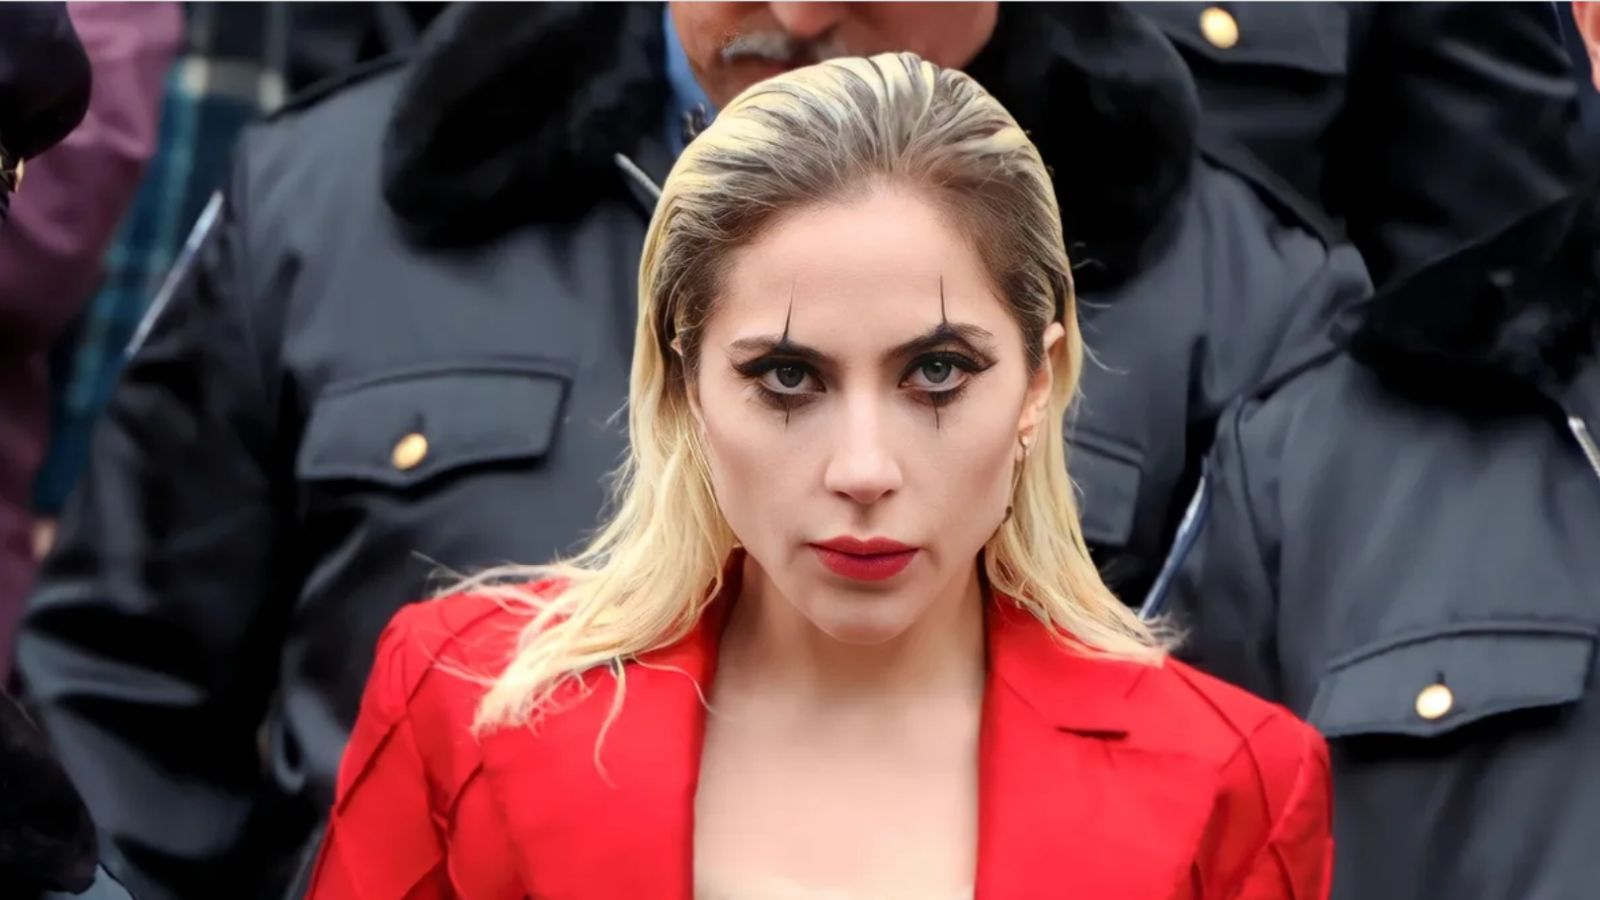 Joker: Folie à Deux, the cinematographer has never met 'the real Lady Gaga' on the set